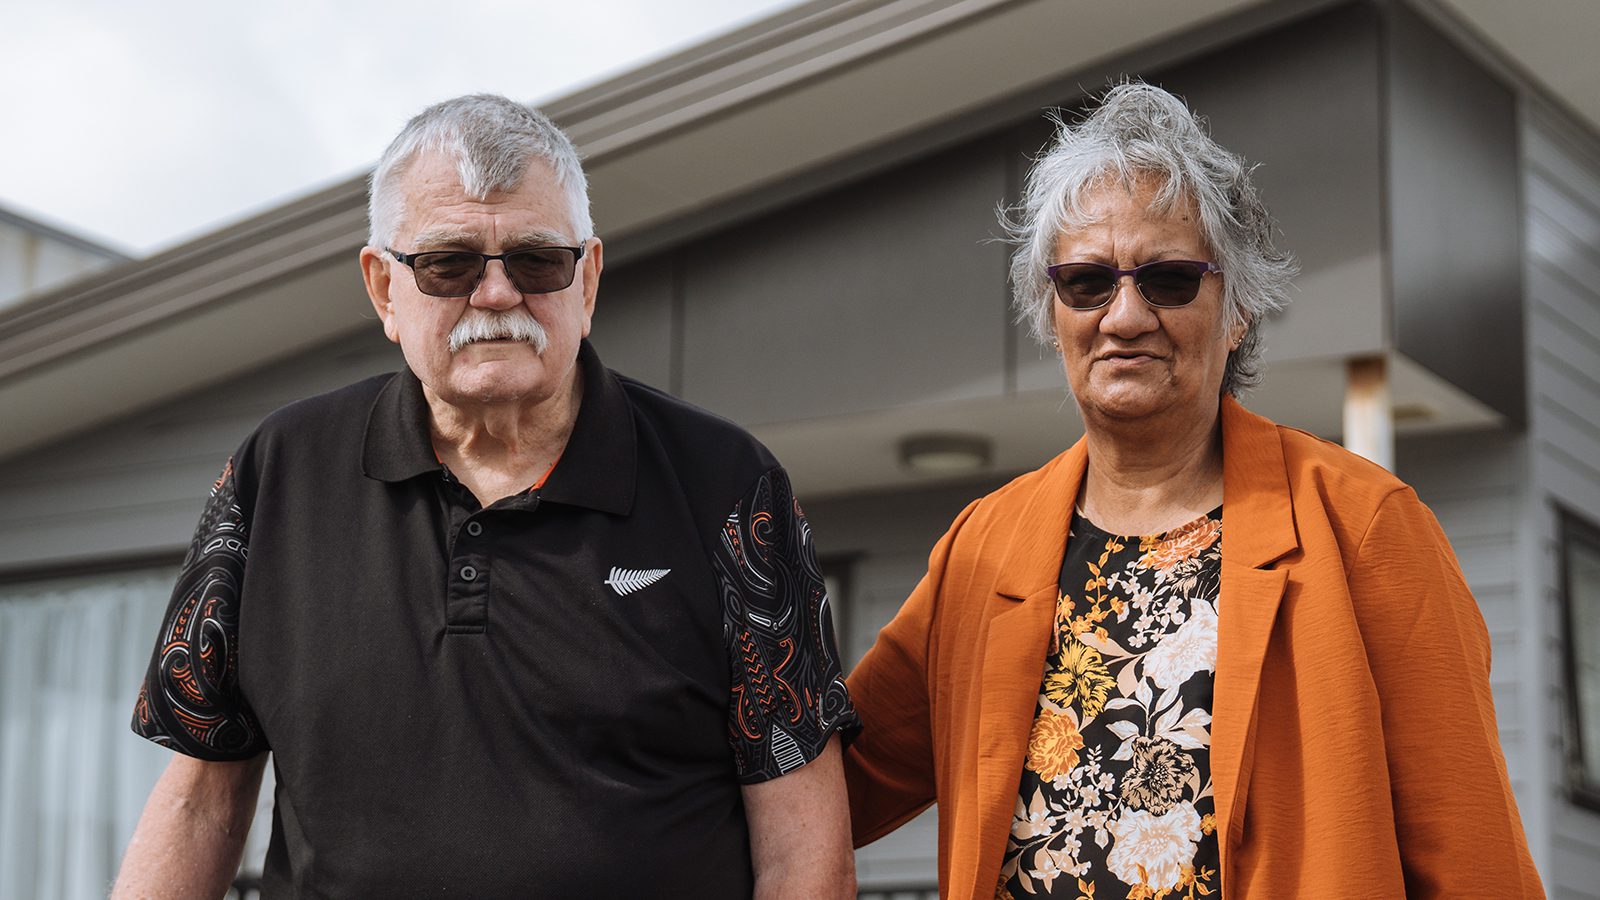 Barry and Florence are Living in a Visionwest Transitional Housing complex